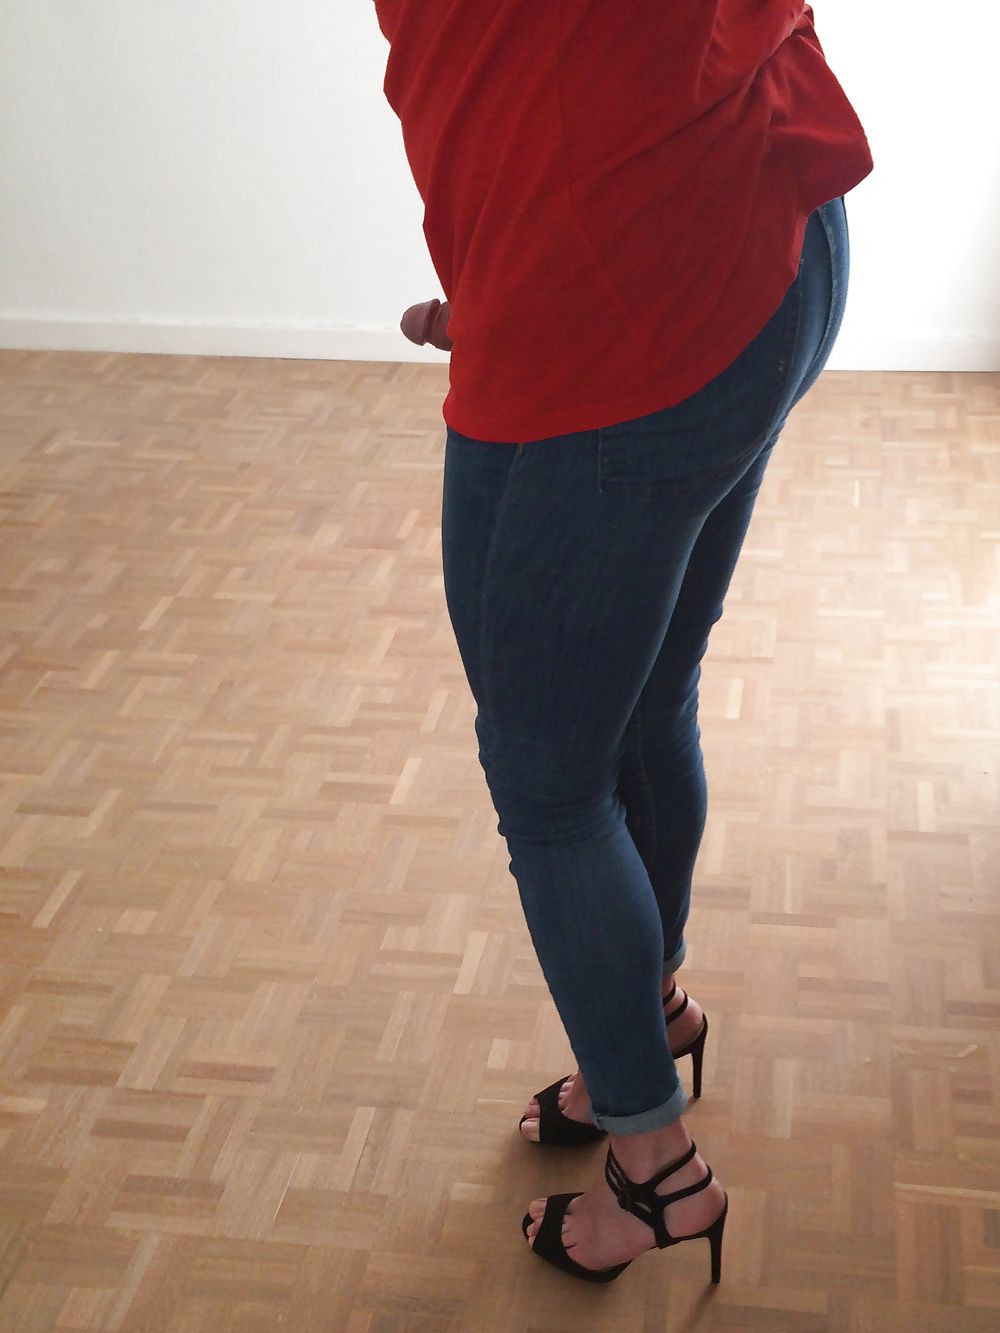 Jeans & red top, whale tail :) #15